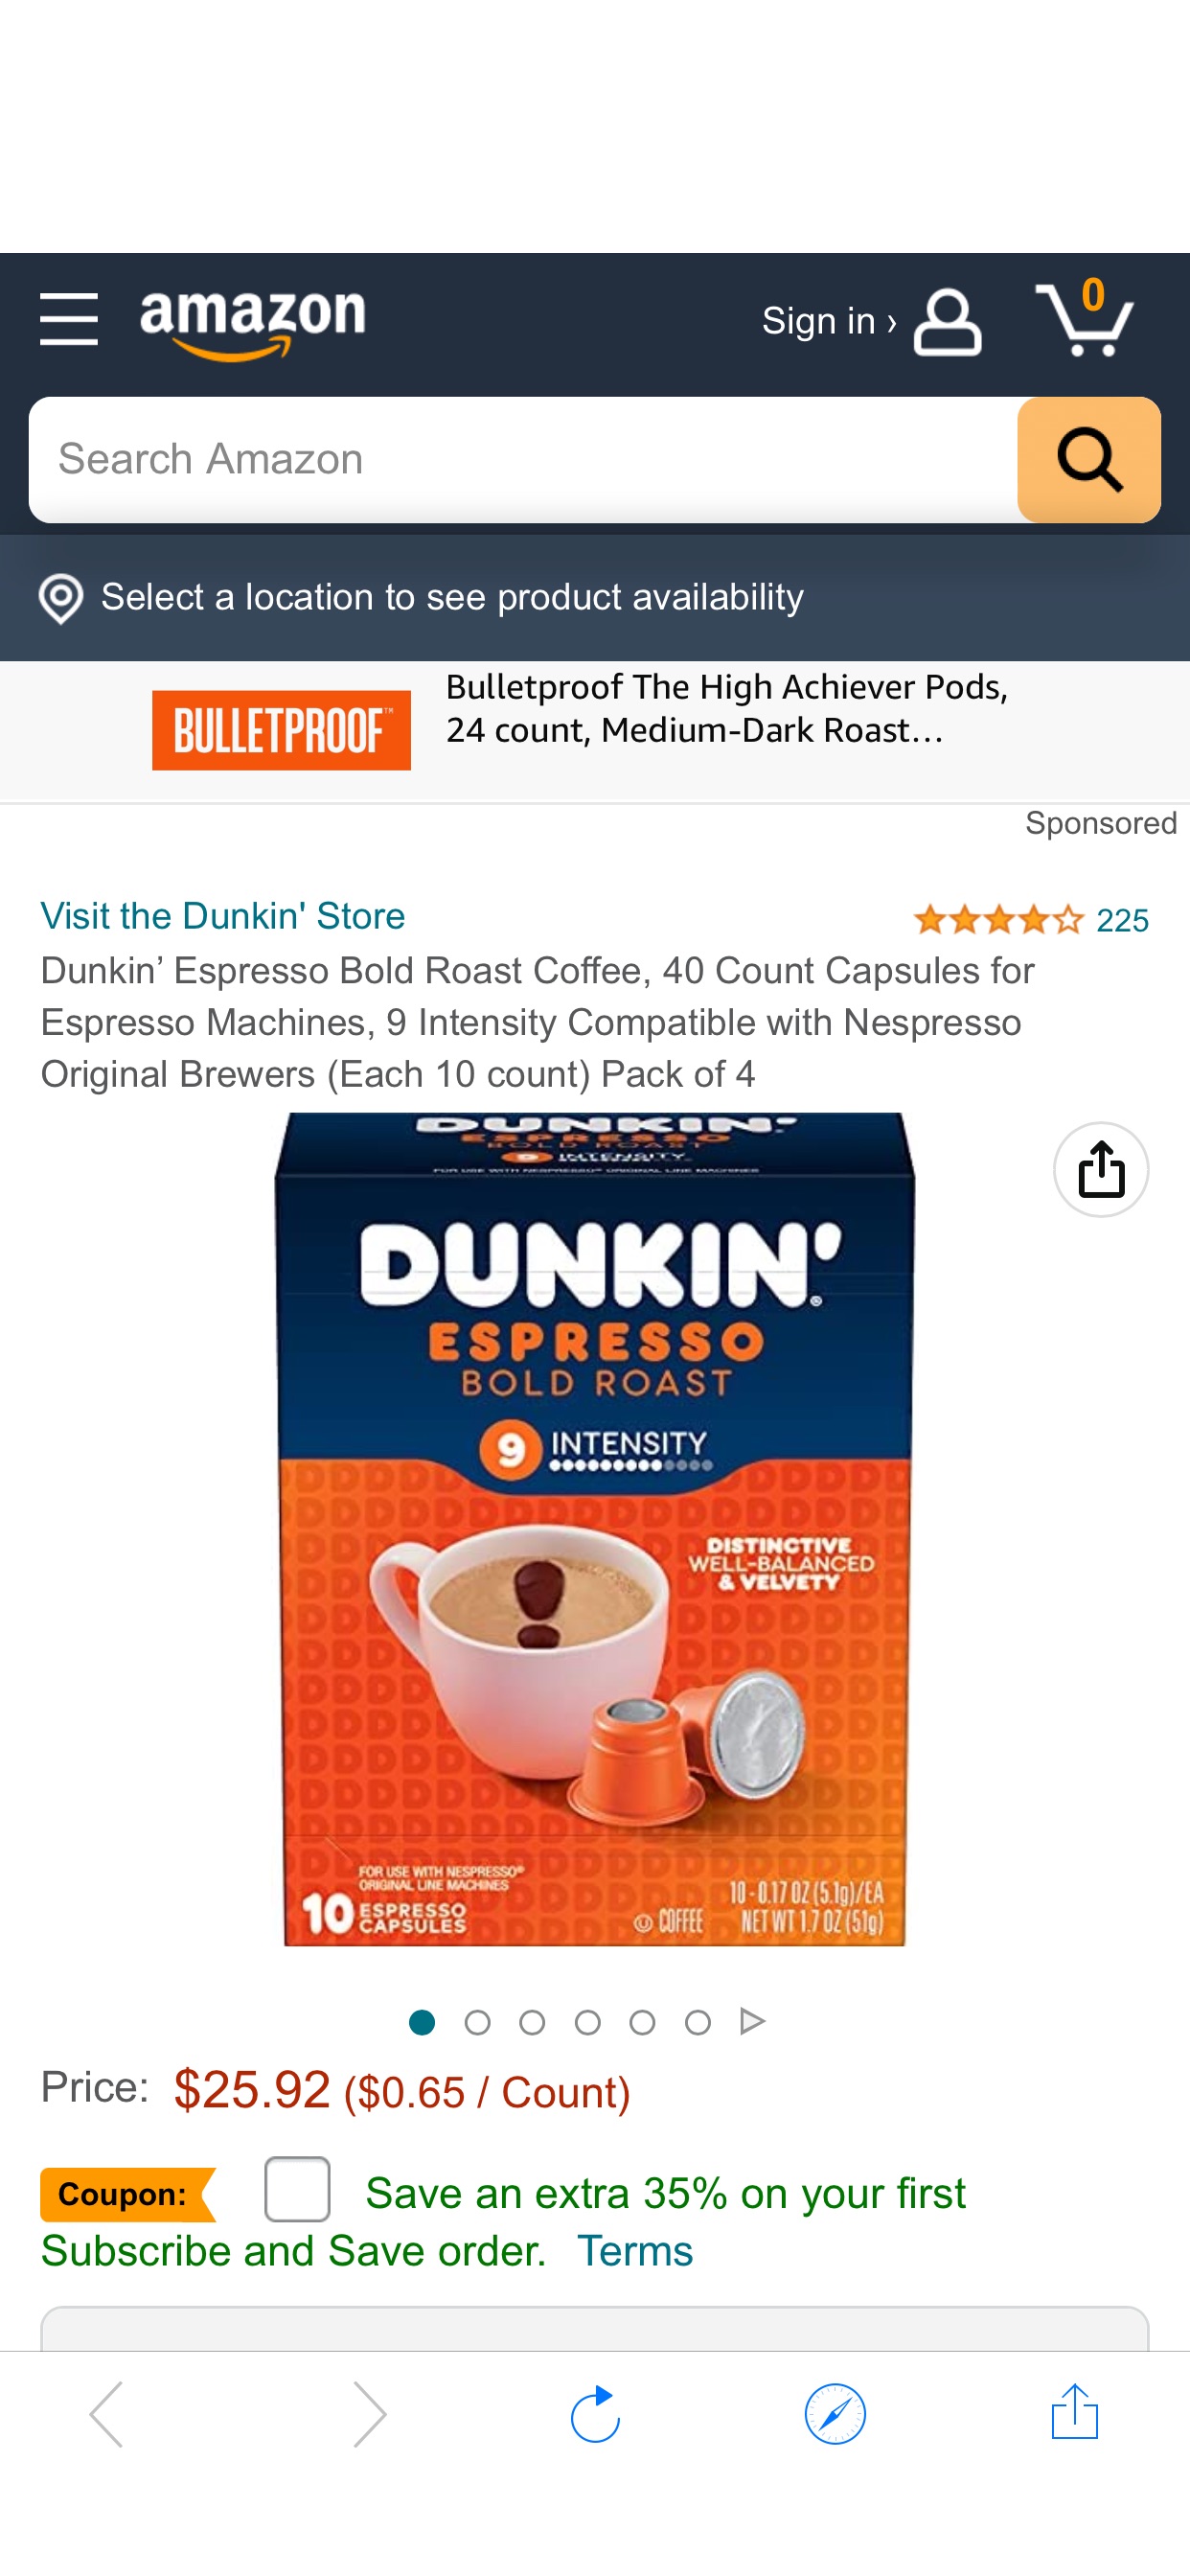 Amazon.com: Dunkin’ Espresso Bold Roast Coffee, 40 Count Capsules for Espresso Machines, 9 Intensity Compatible with Nespresso Original Brewers (Each 10 count) Pack of 4 : Grocery & Gourmet Food